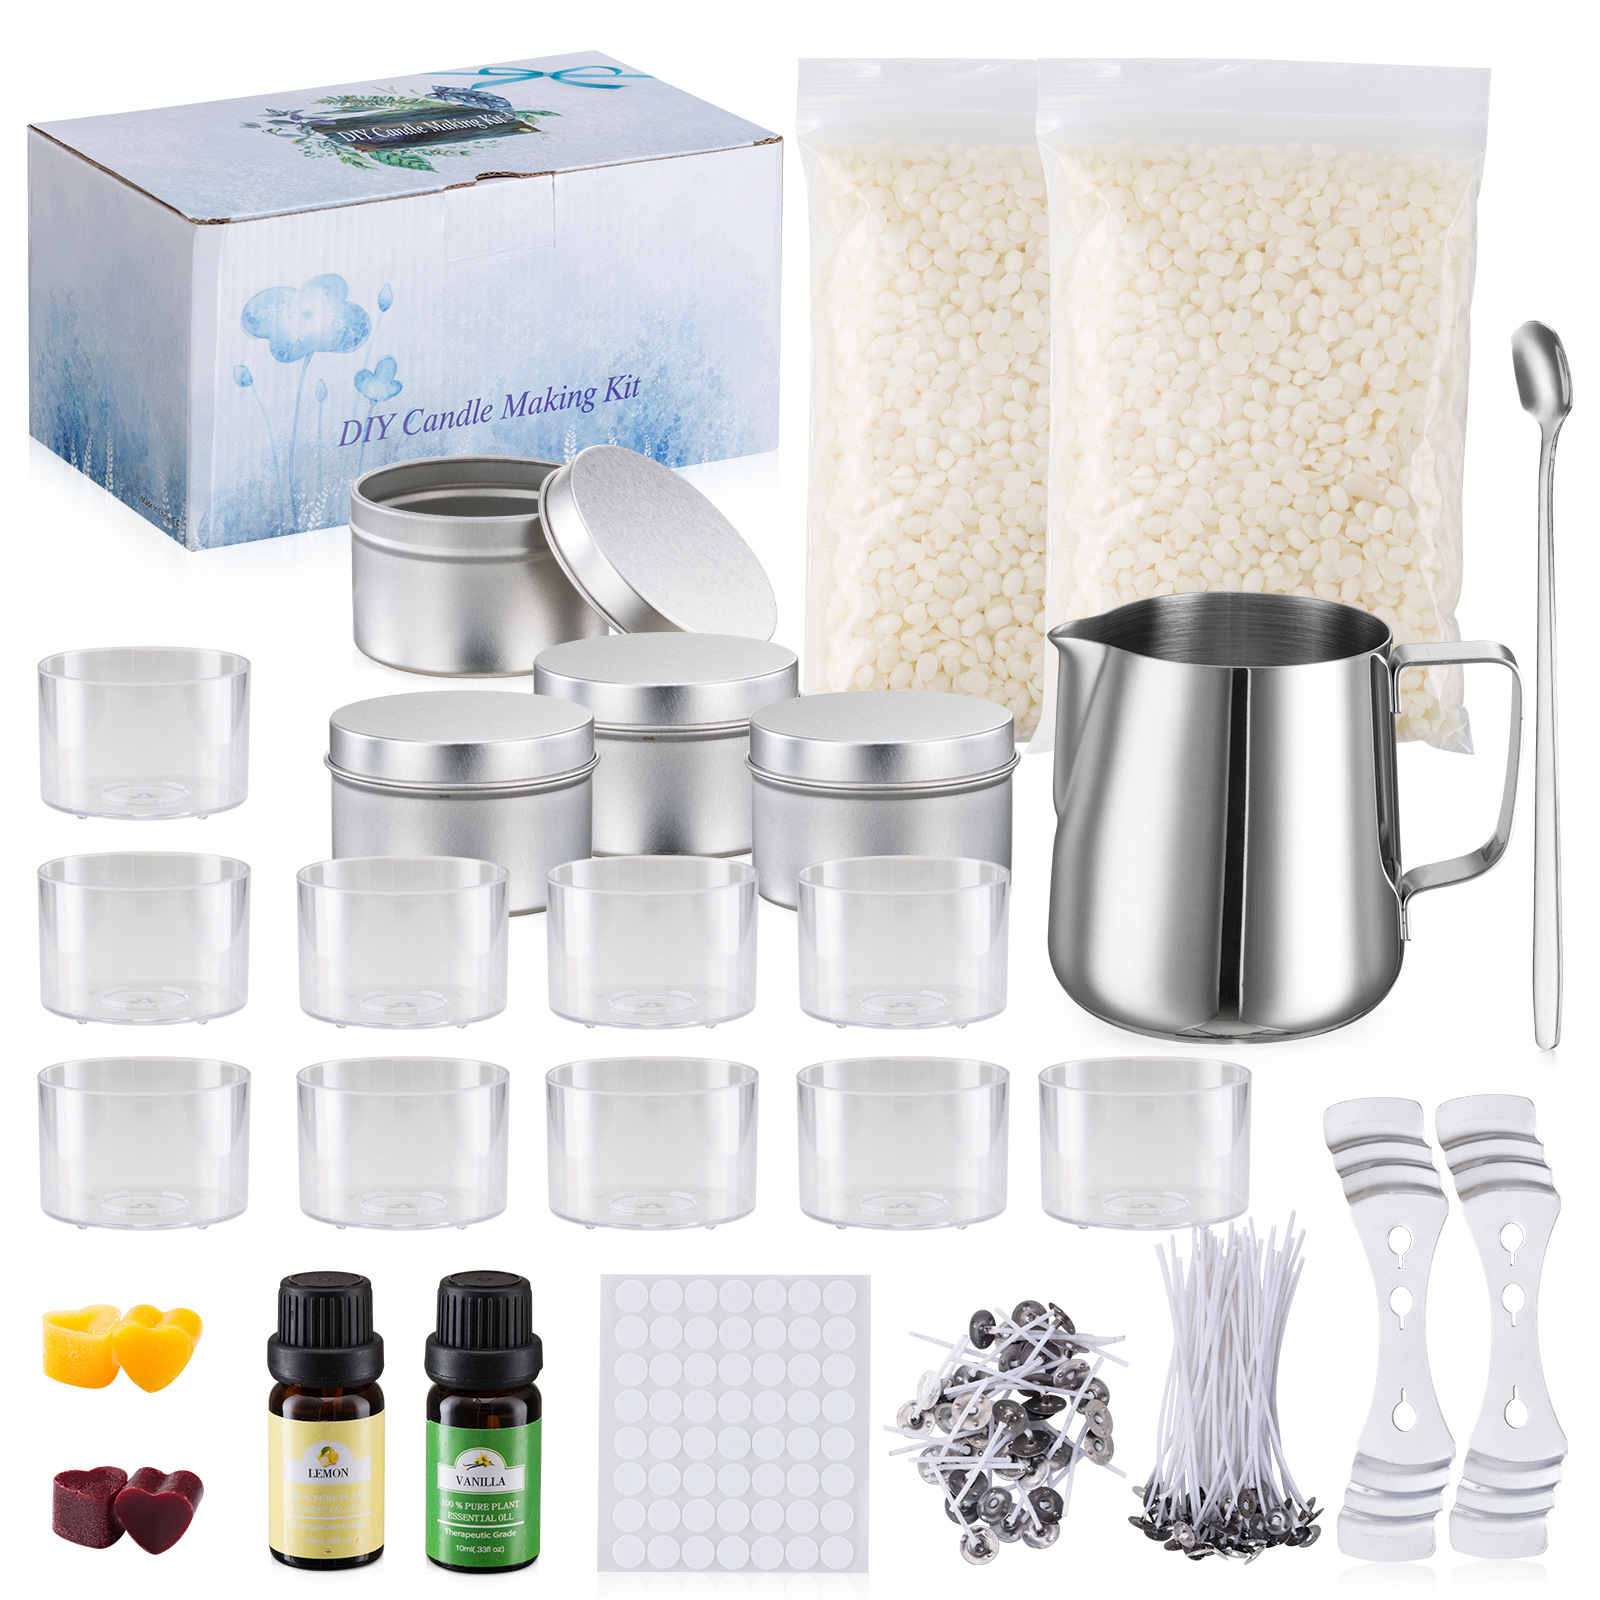 Candle Making Kit with Electronic Hot Plate, Candle Making Tools